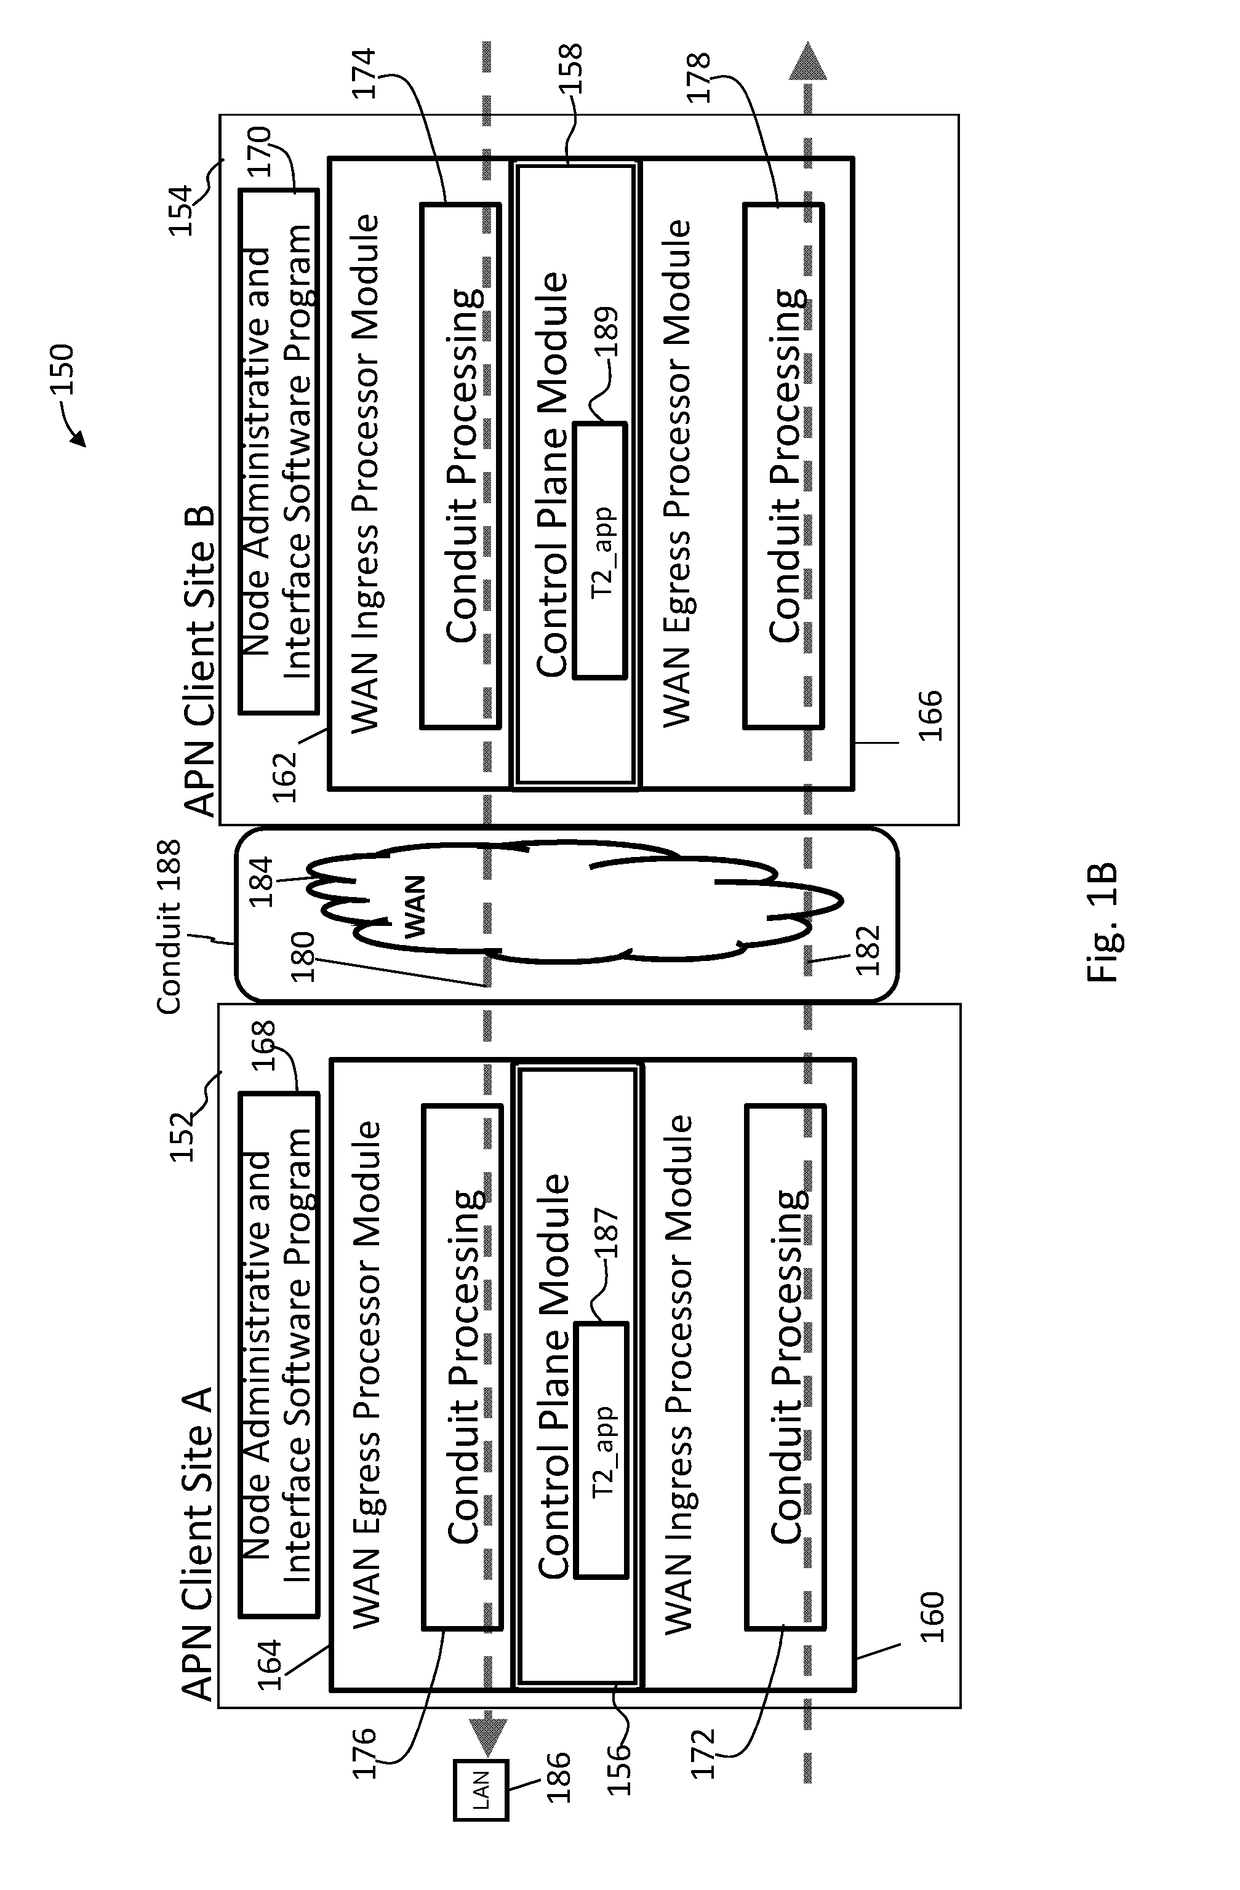 Methods and apparatus for accessing selectable application processing of data packets in an adaptive private network